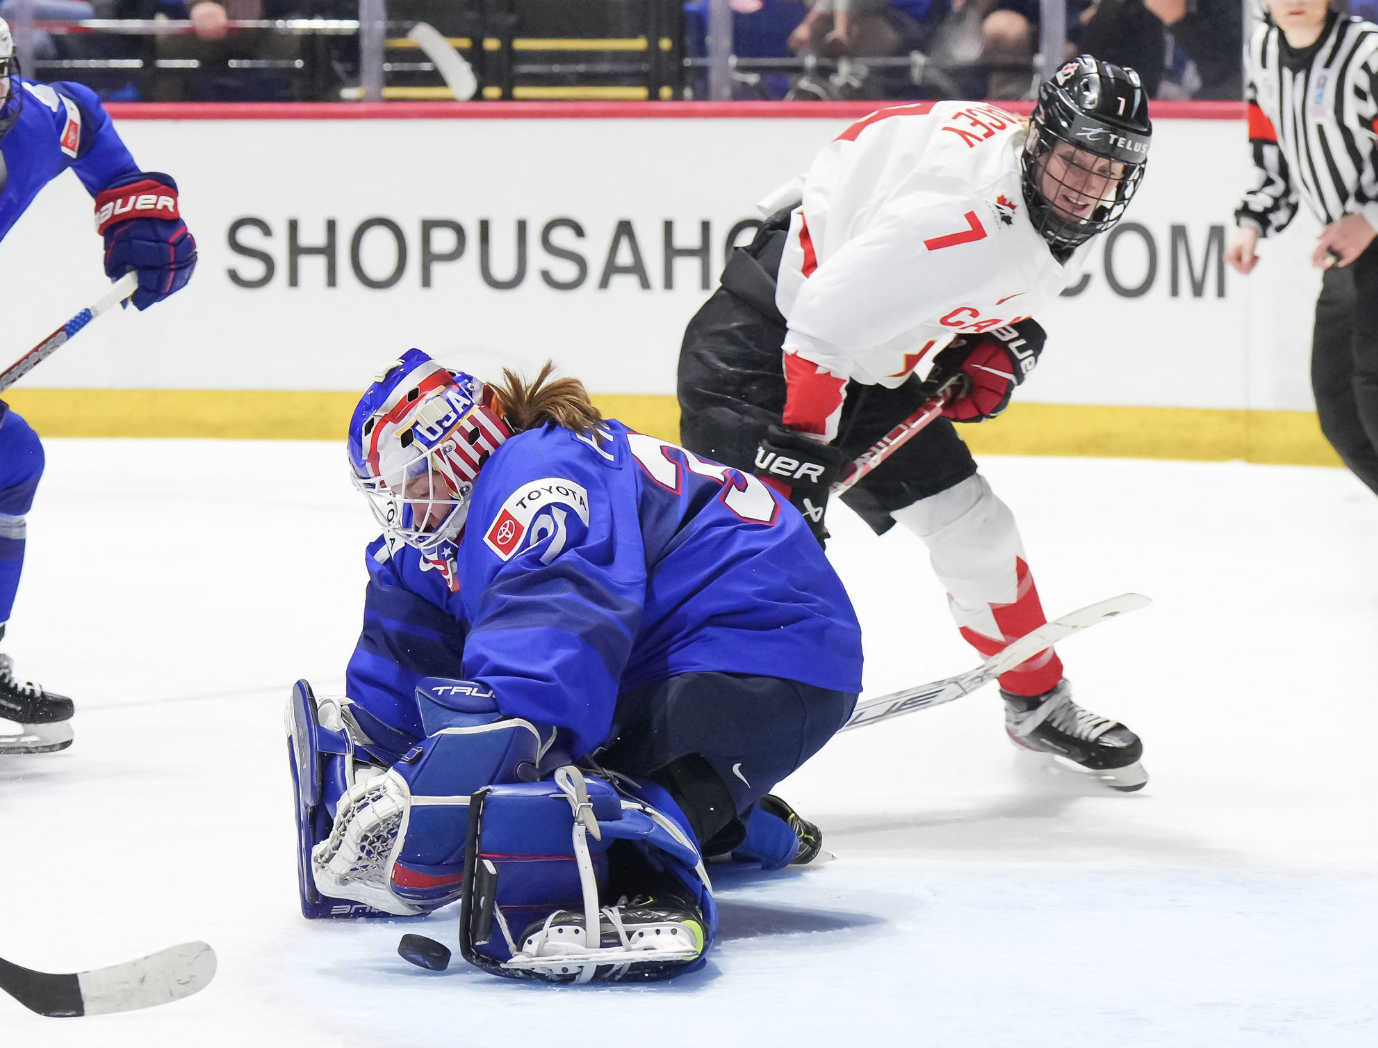 Frankel makes a save from the butterfly position. Her hands are in front of her, and the puck is next to her left leg. Her stick is caught up with Stacey, who is going past Frankel to her right after taking the shot. Frankel is in blue, while Stacey is in white.